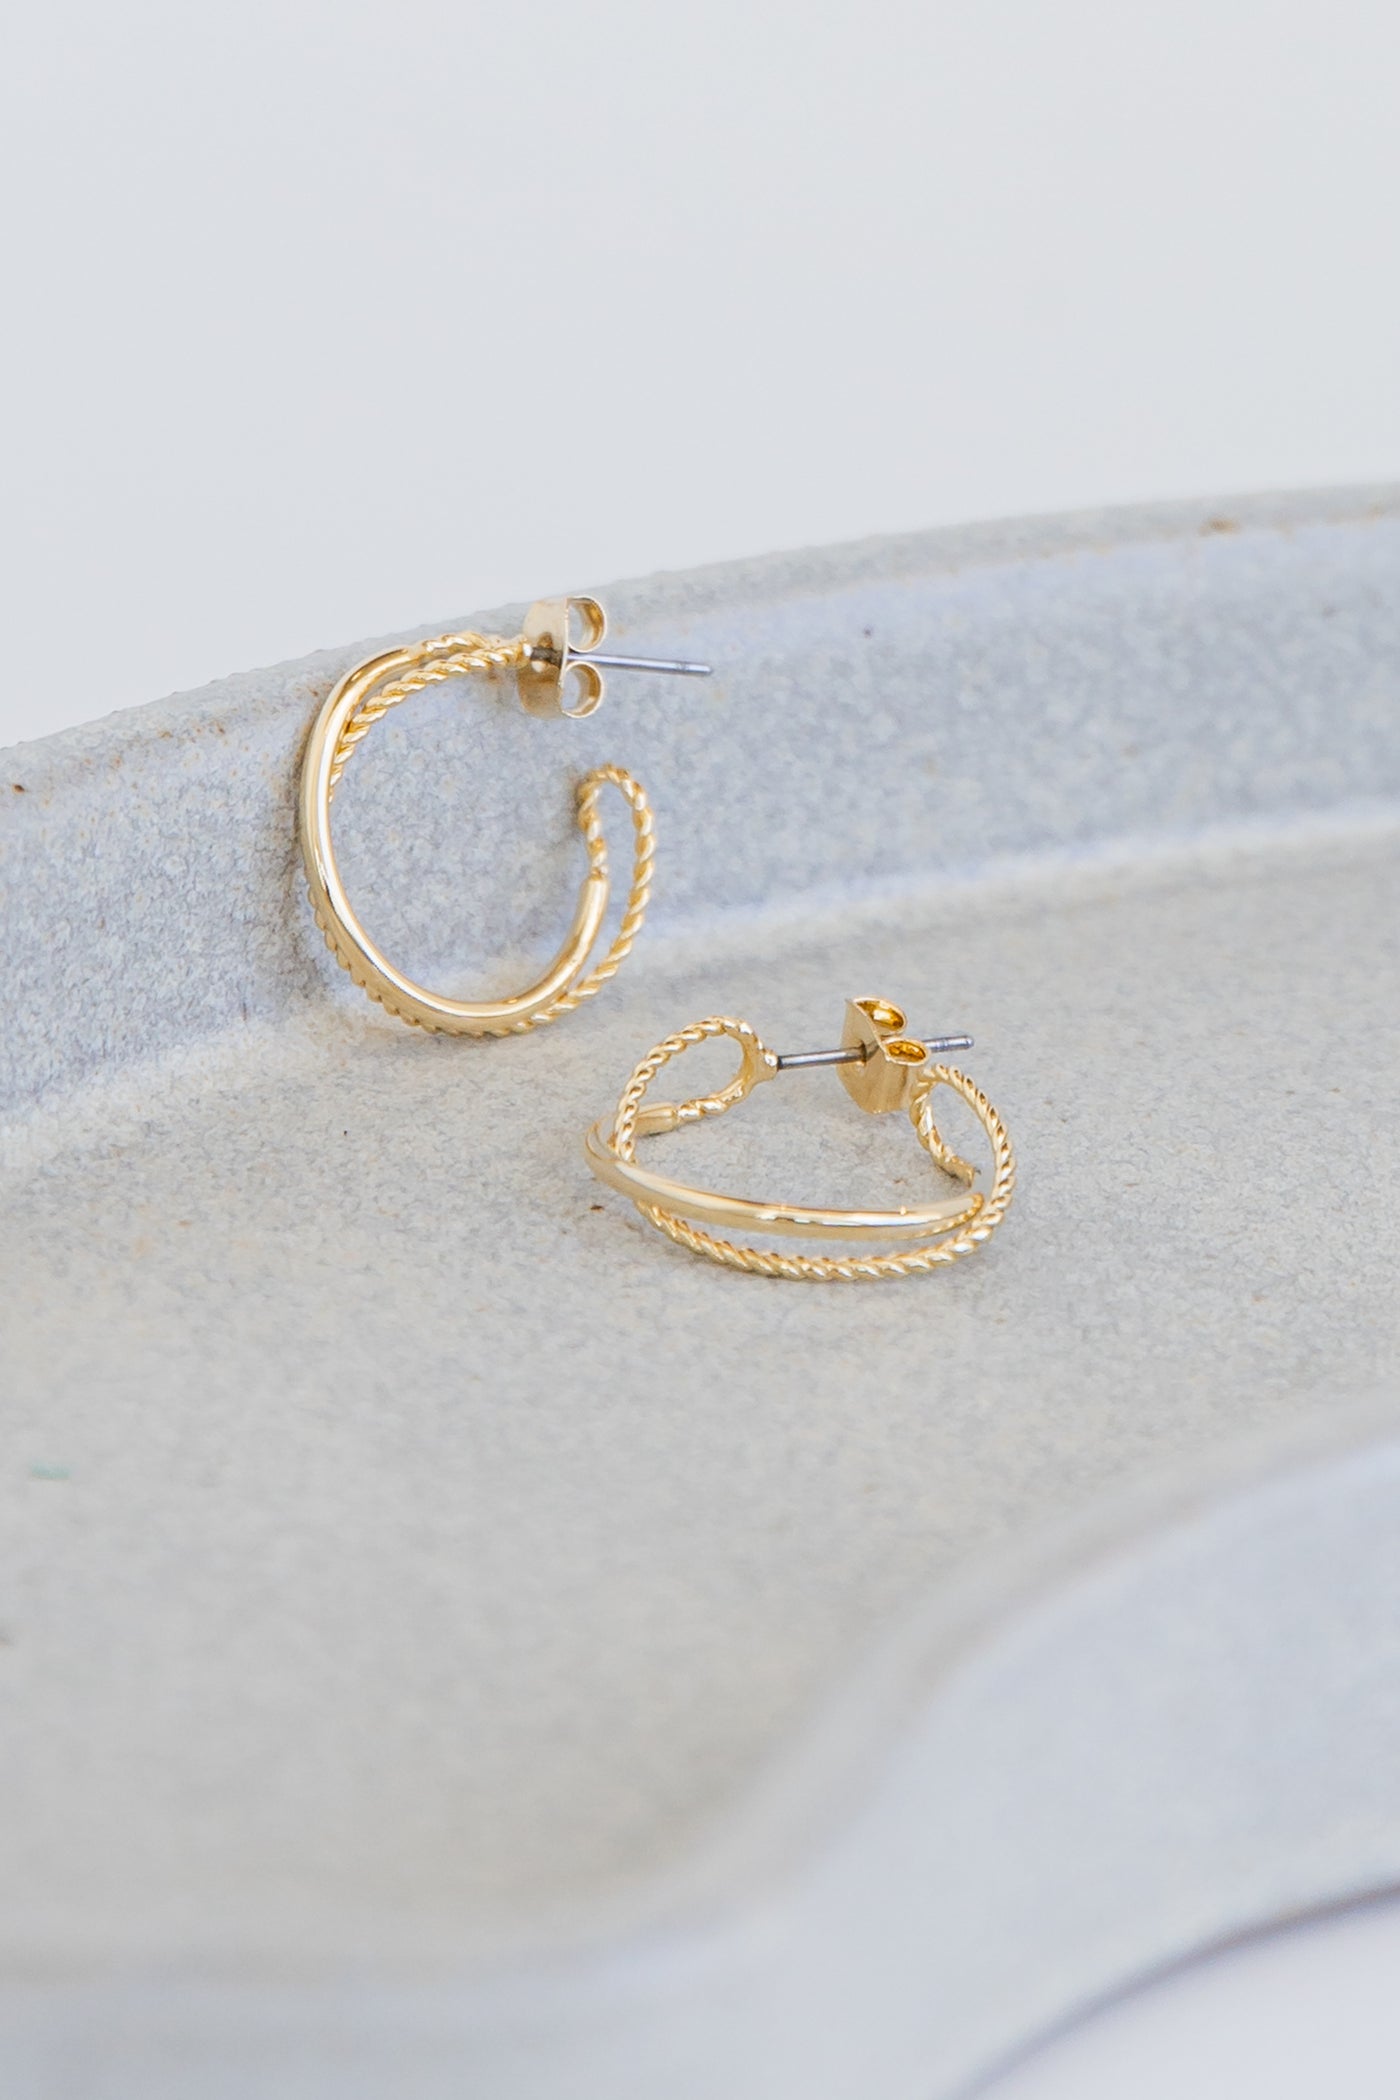 Gold Double Hoop Earrings close up